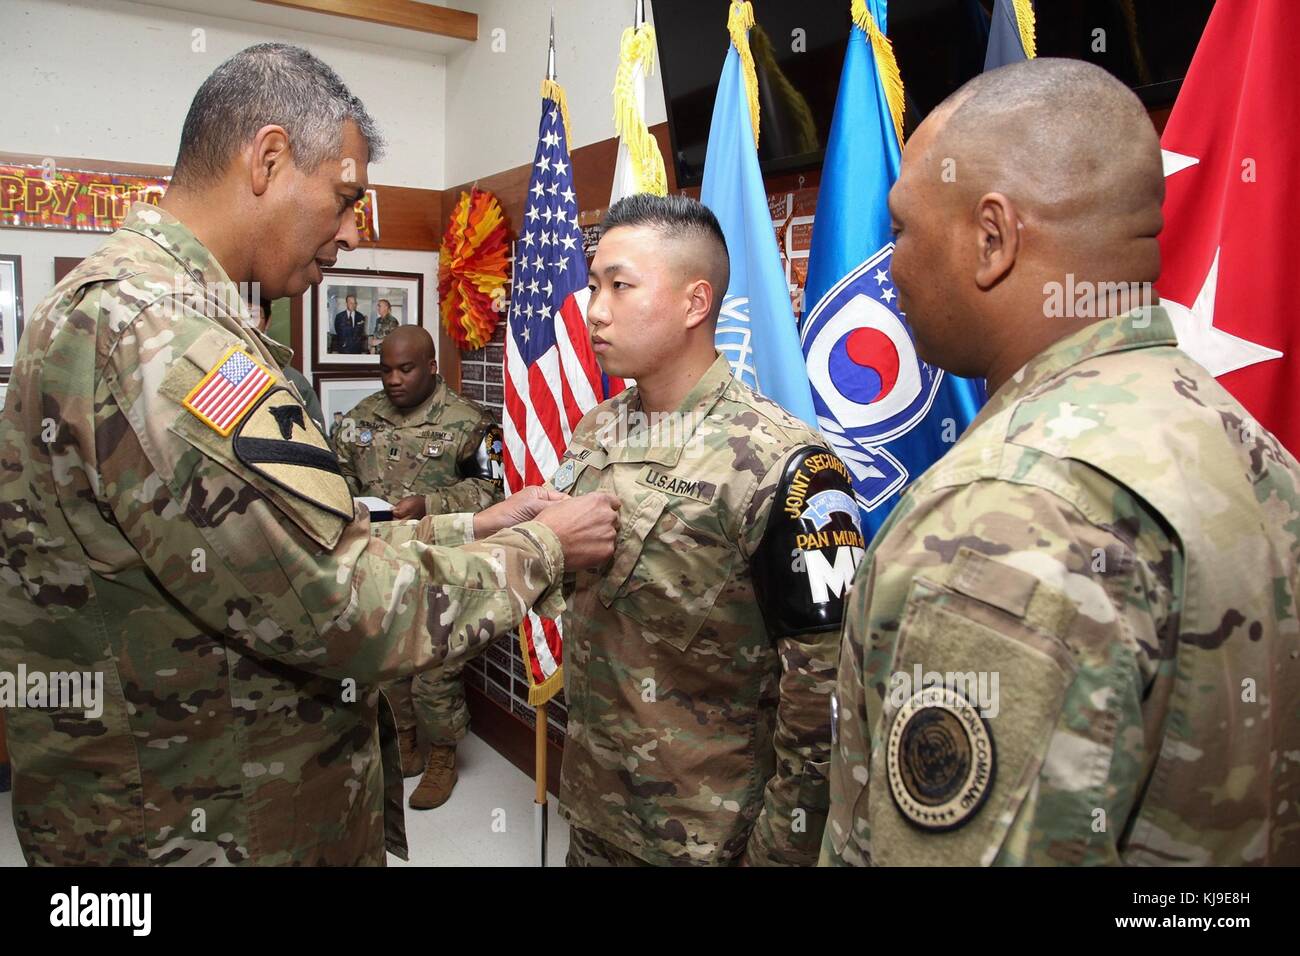 Paju, South Korea. 23rd November, 2017. U.S. Army Gen. Vincent Brooks, U.S. and U.N. Forces Korea commander, left, presents the Army Commendation medal to U.S. and South Korean soldiers during a Thanksgiving Day ceremony at Camp Bonifas on the Demilitarized Zone November 23, 2017 in Paju, South Korea. The soldiers were recognition for their efforts in rescuing a North Korean defector on November 13th. Credit: Planetpix/Alamy Live News Stock Photo